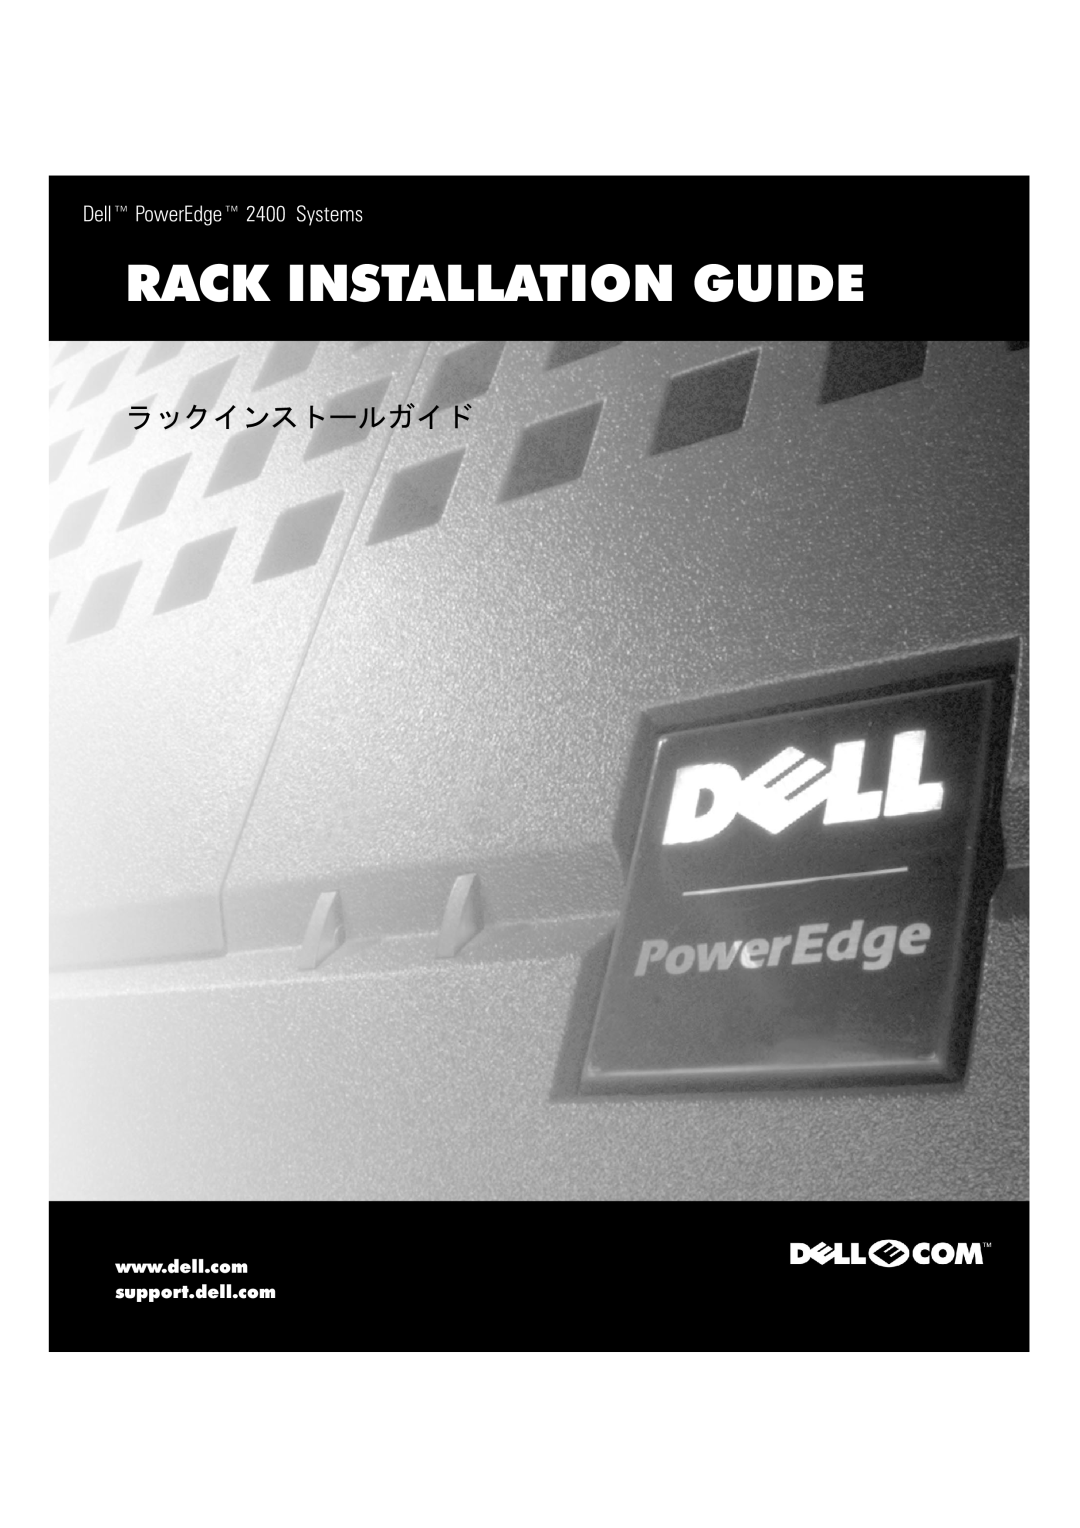 Dell manual Rack Installation Guide, Dell PowerEdge 2400 Systems 